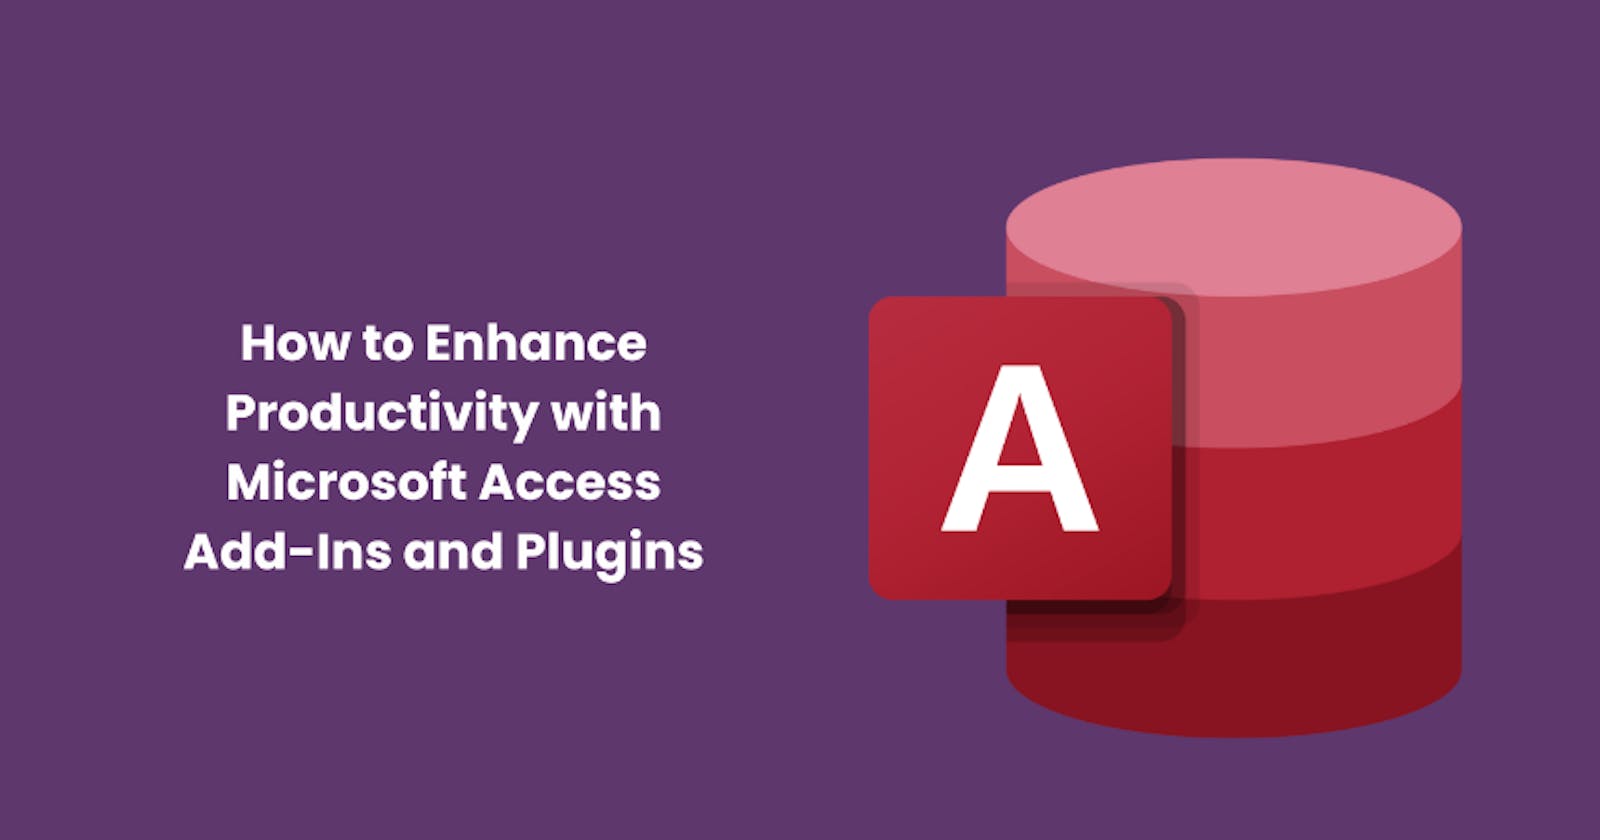 How to Enhance Productivity with Microsoft Access Add-Ins and Plugins